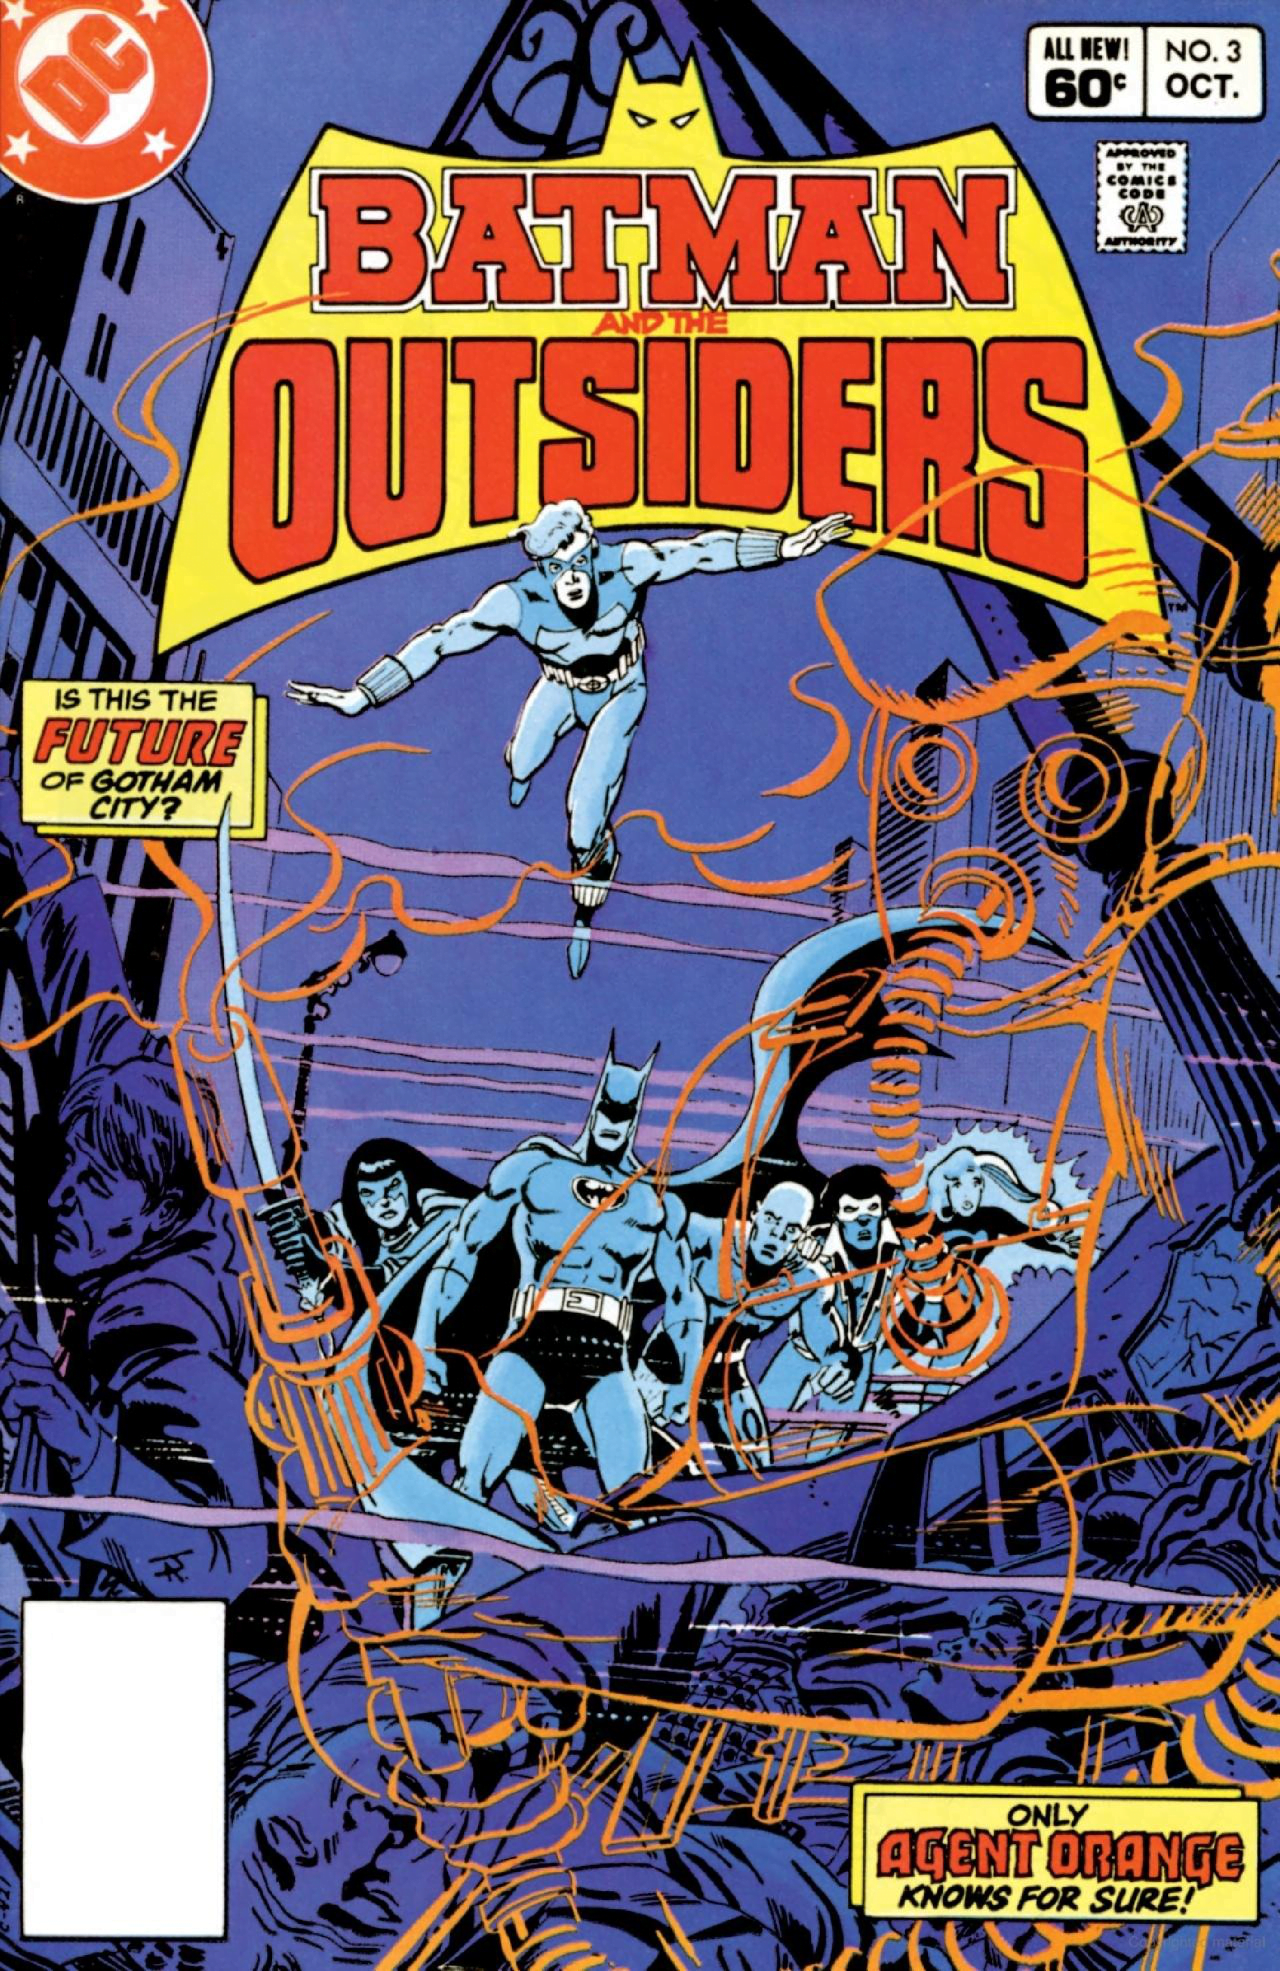 Batman and the Outsiders #3 (1983 1st Series) - The Comic Book Store